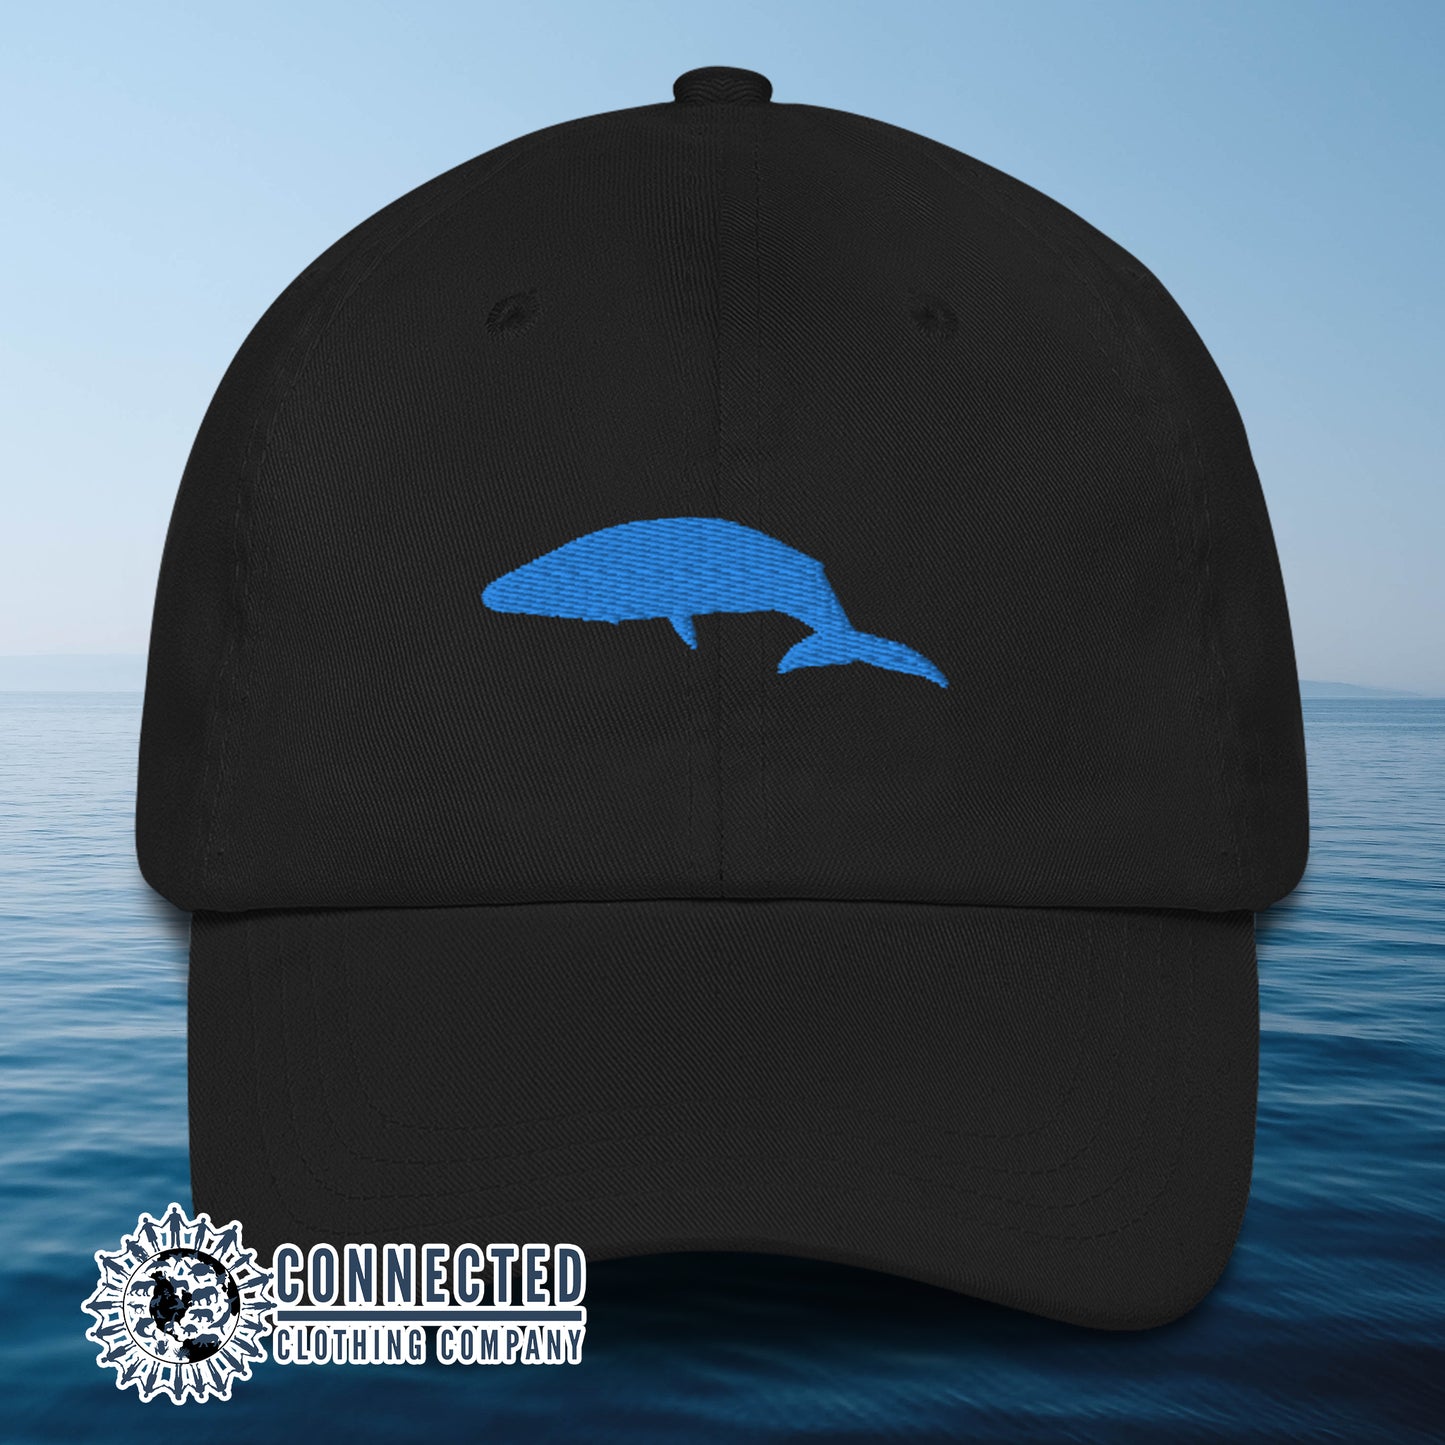 Black Blue Whale Cotton Cap - Connected Clothing Company - 10% of profits donated to Mission Blue ocean conservation